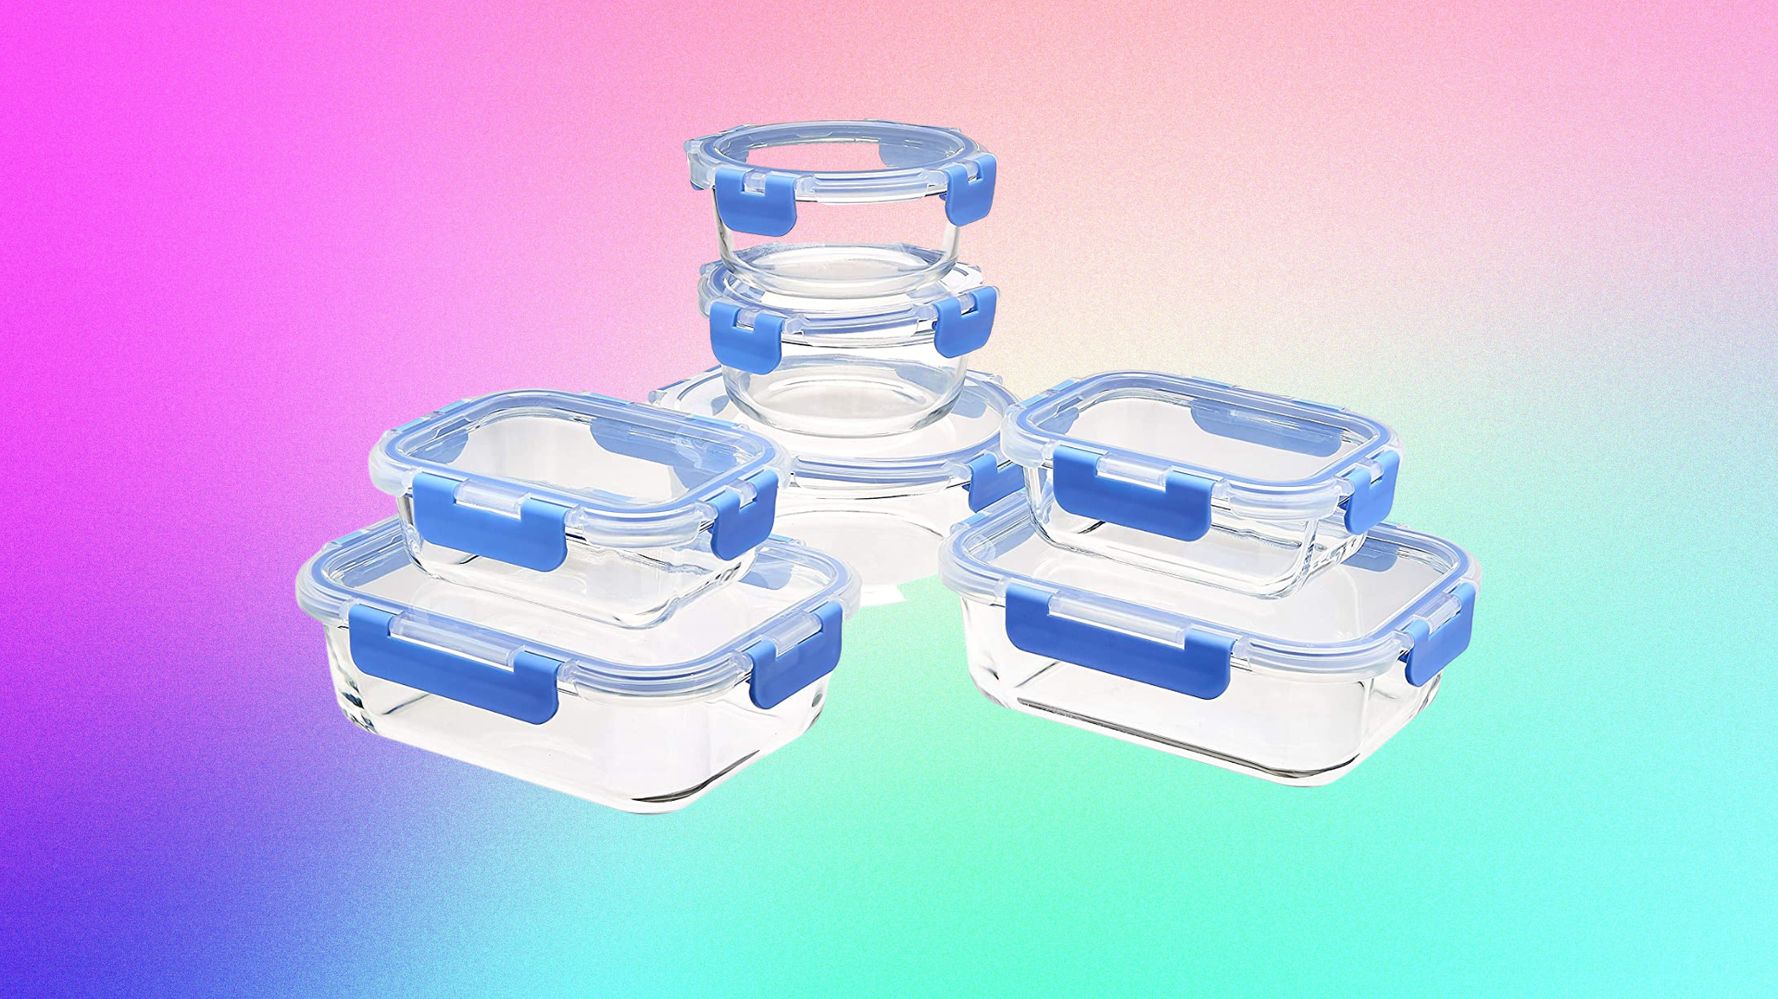 Tupperware's Grandma-Approved Containers and Tools Start at $5 During  's October Prime Day